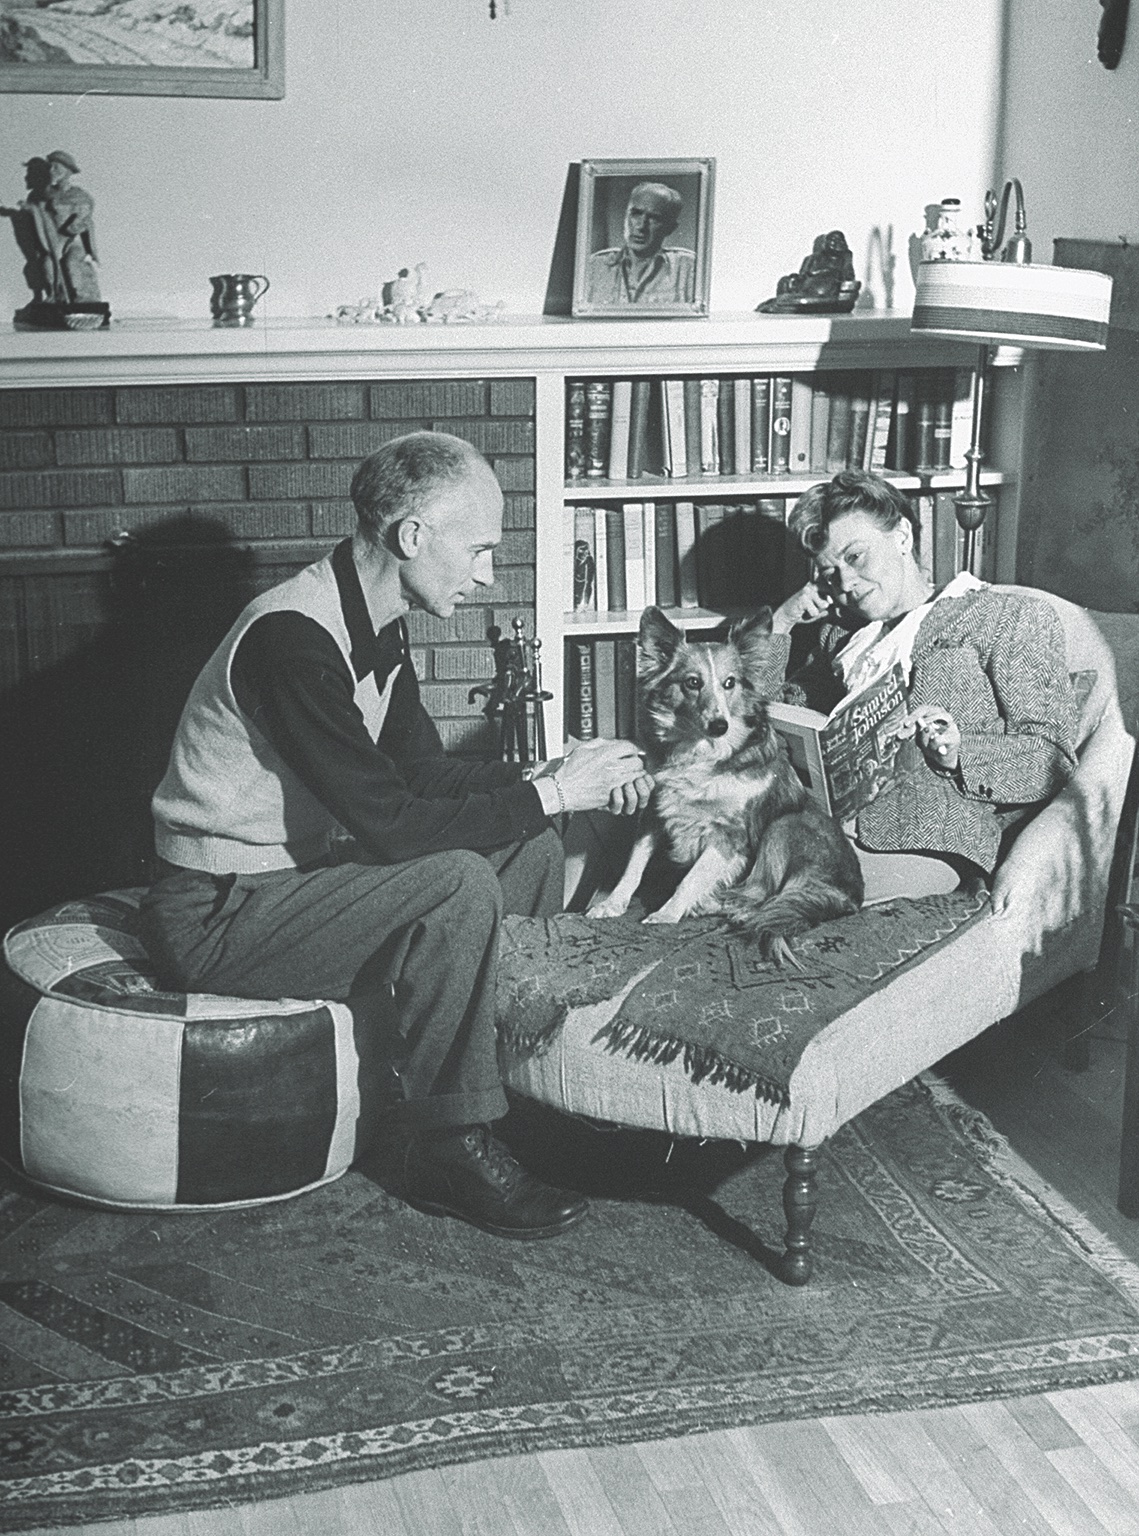 Pyle with his wife, Jerry, and their Shetland sheepdog, Cheetah, at their home in Albuquerque, New Mexico. (Bob Landry/LIFE Picture Collection/Getty Images) 